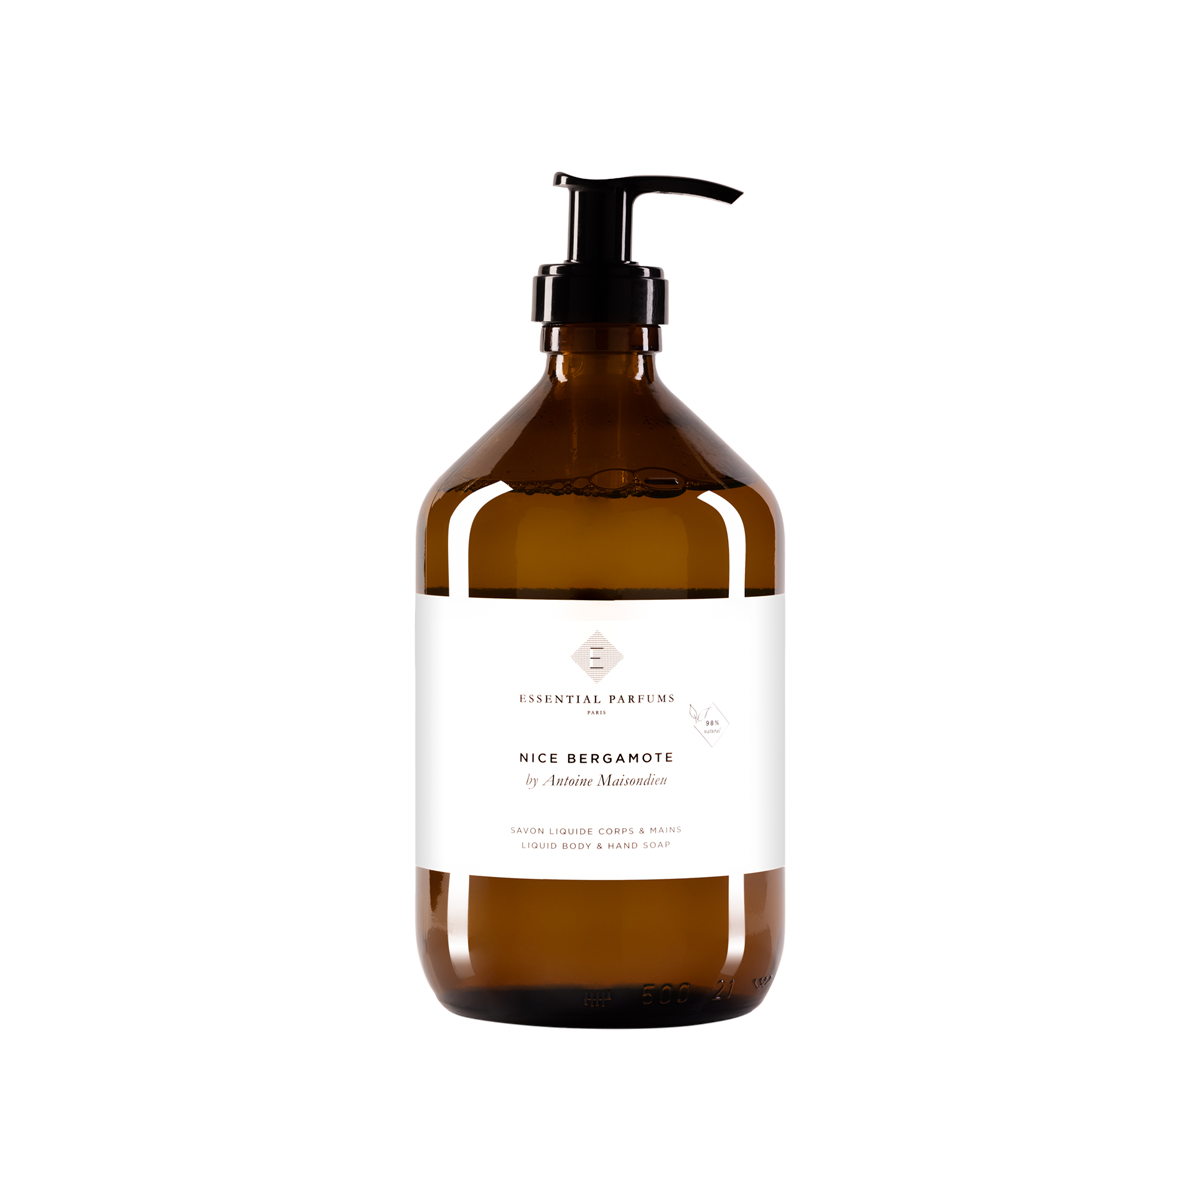 Essential Parfums - Nice Bergamote Hand and Body Soap